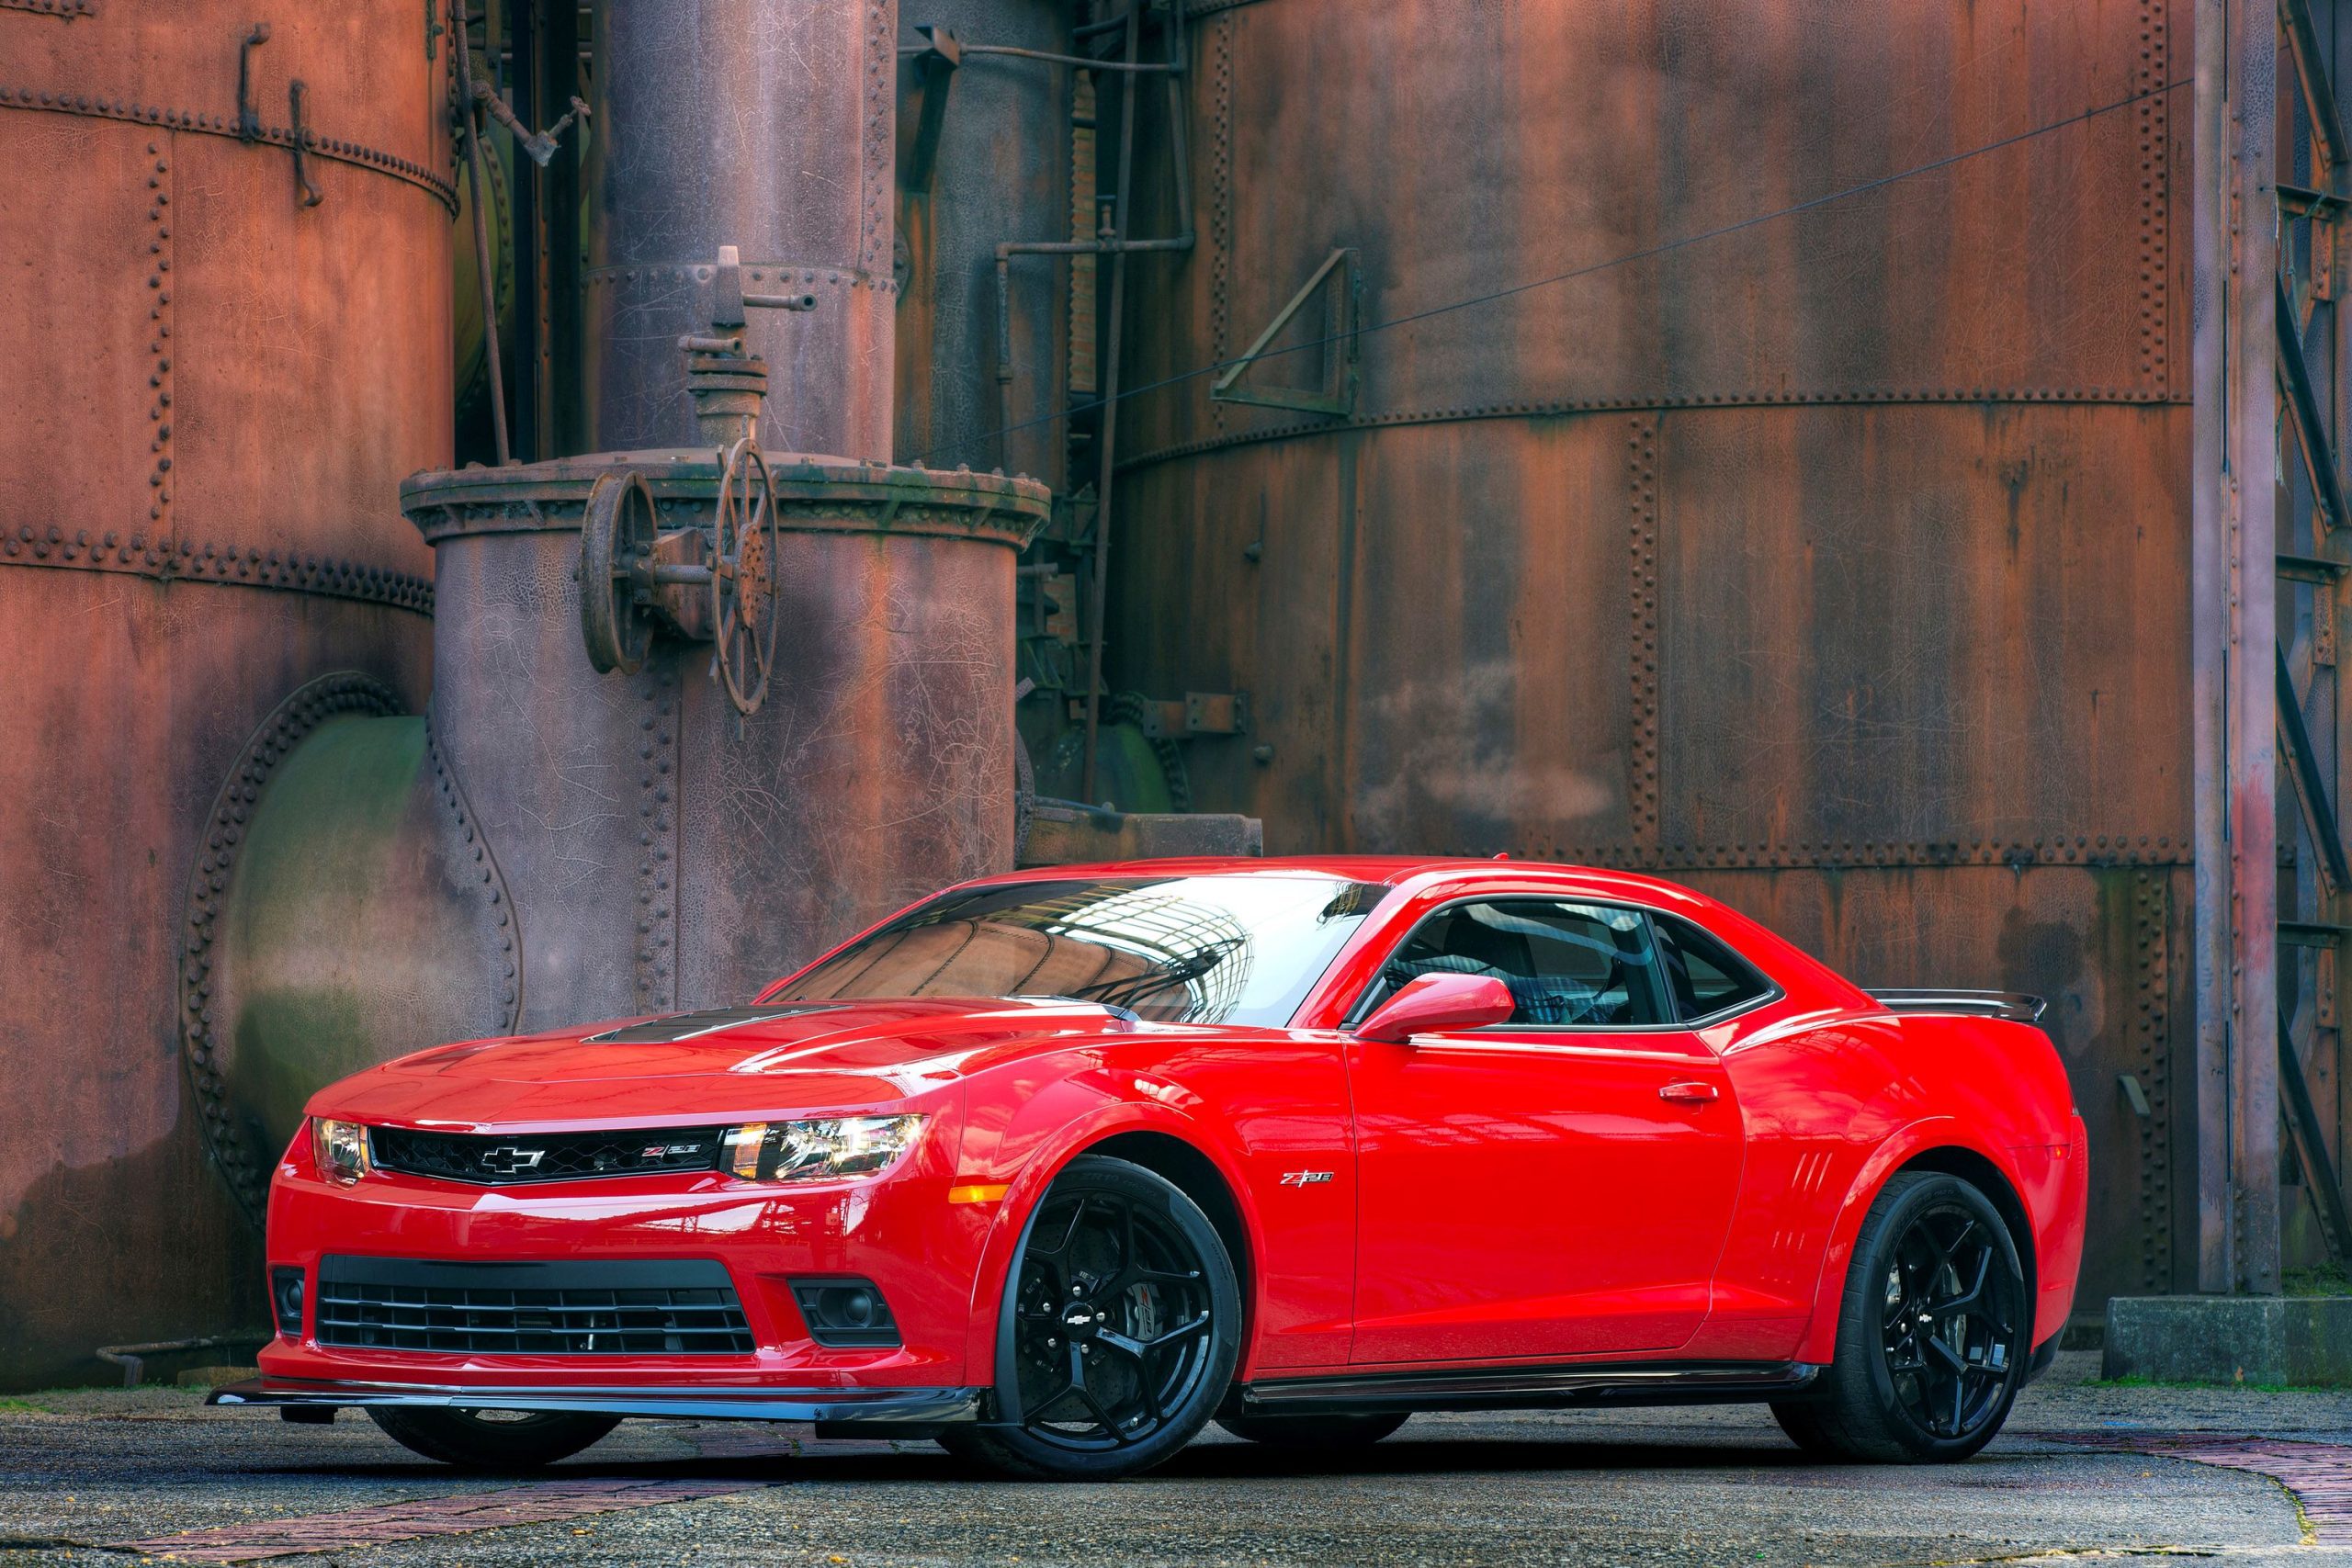 The 2014 Camaro Z/28 is an all American track hunter